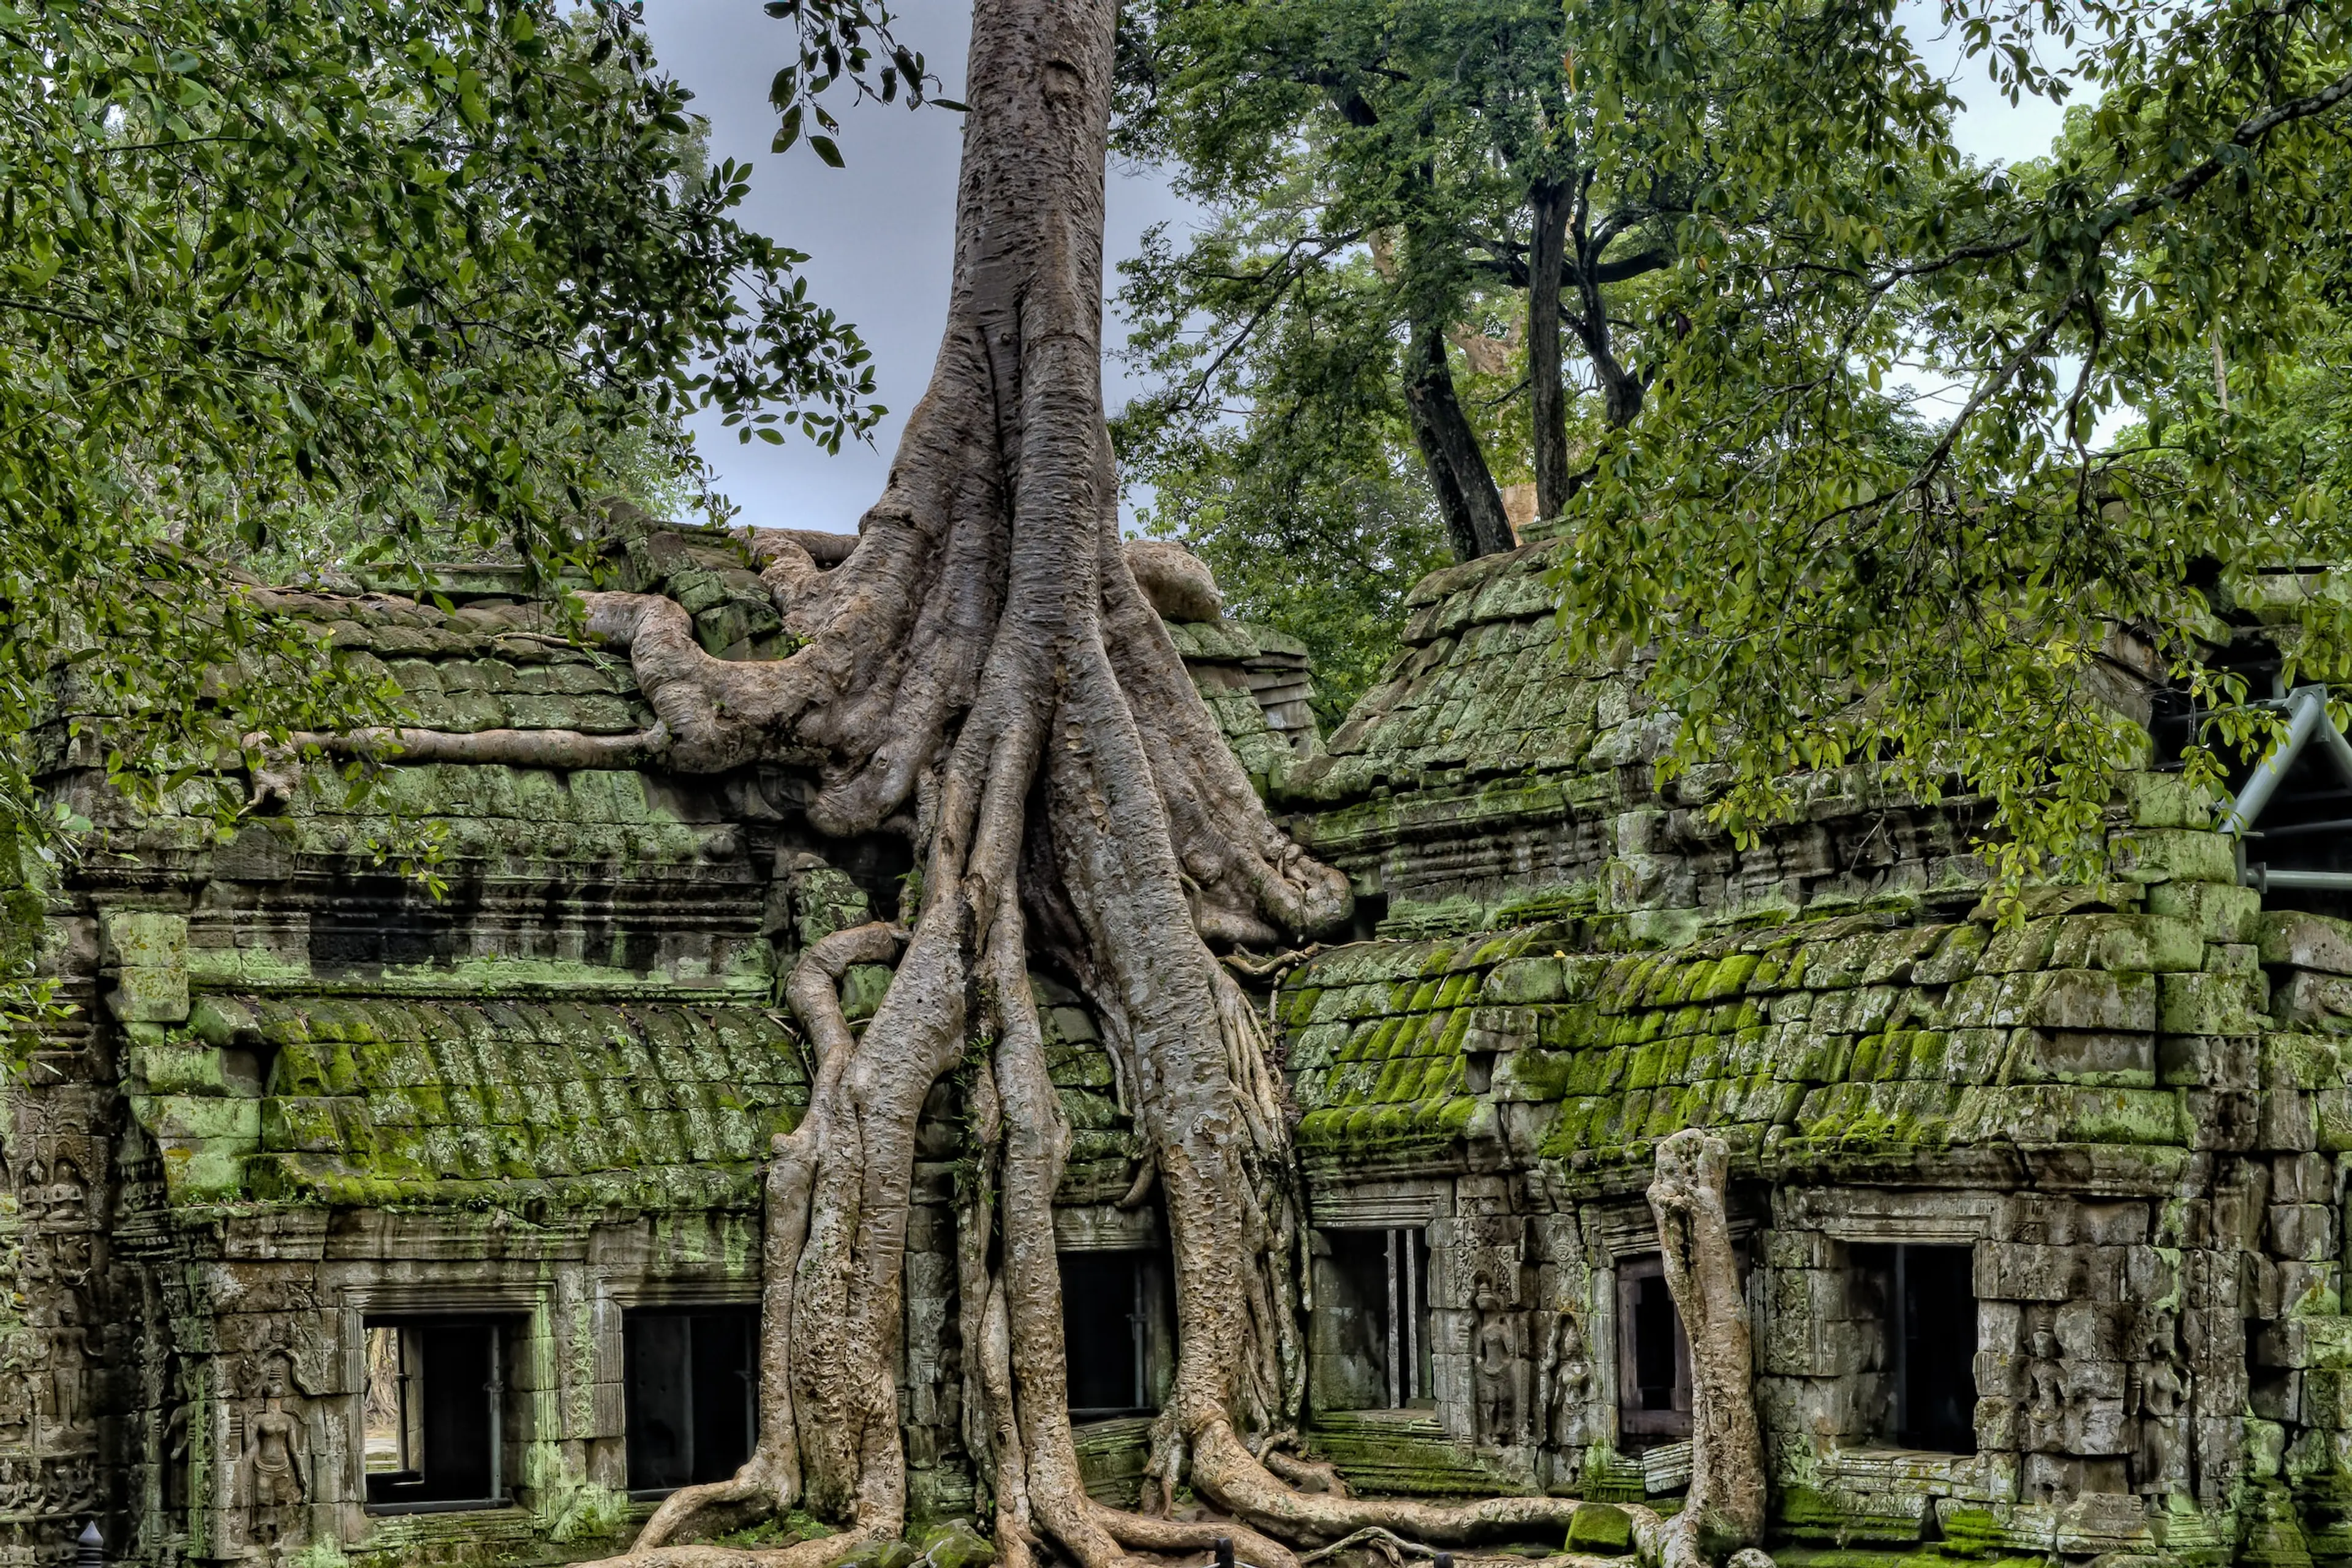 Khmer Traditonal Temples, located in Siem Reap, a destination in Mr Biker Saigon cycling tours